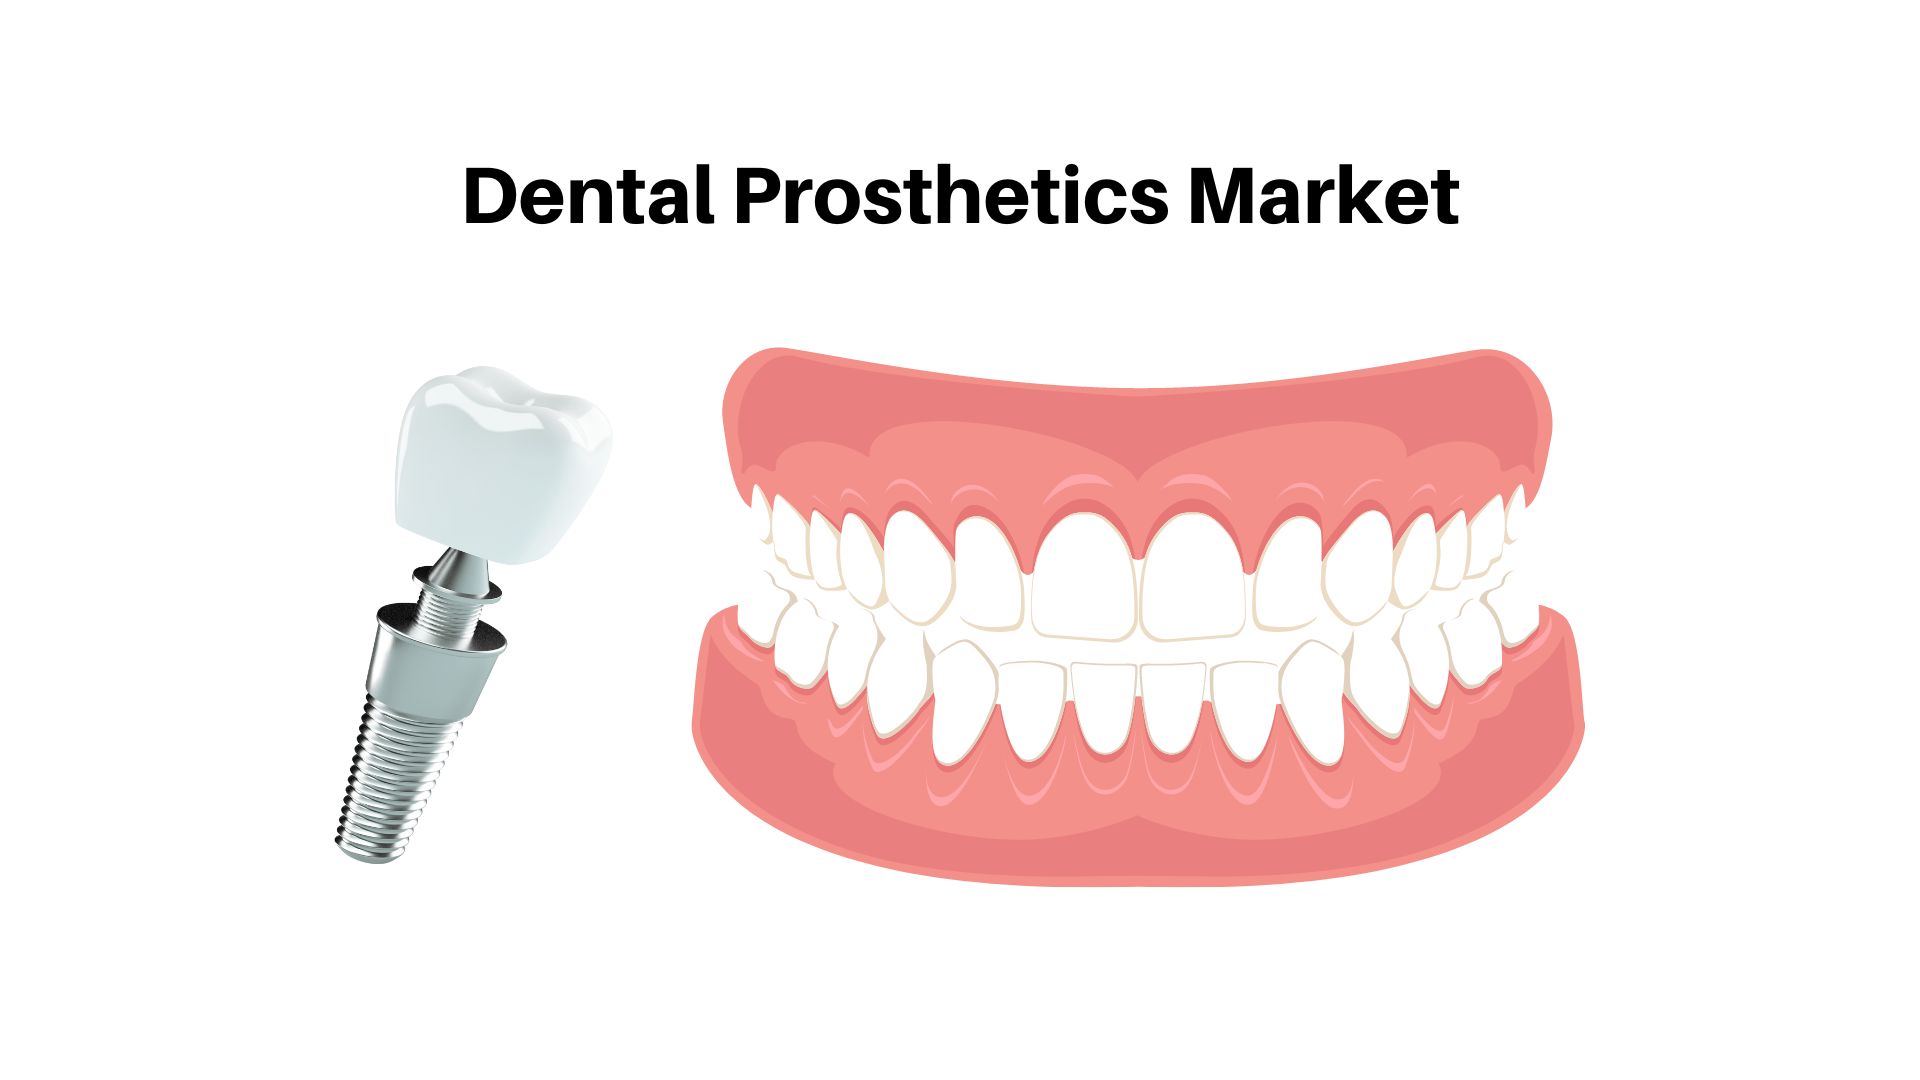 Global Dental Prosthetics Market Will Hit USD 2453 Mn by 2032 with a CAGR of 13.3%